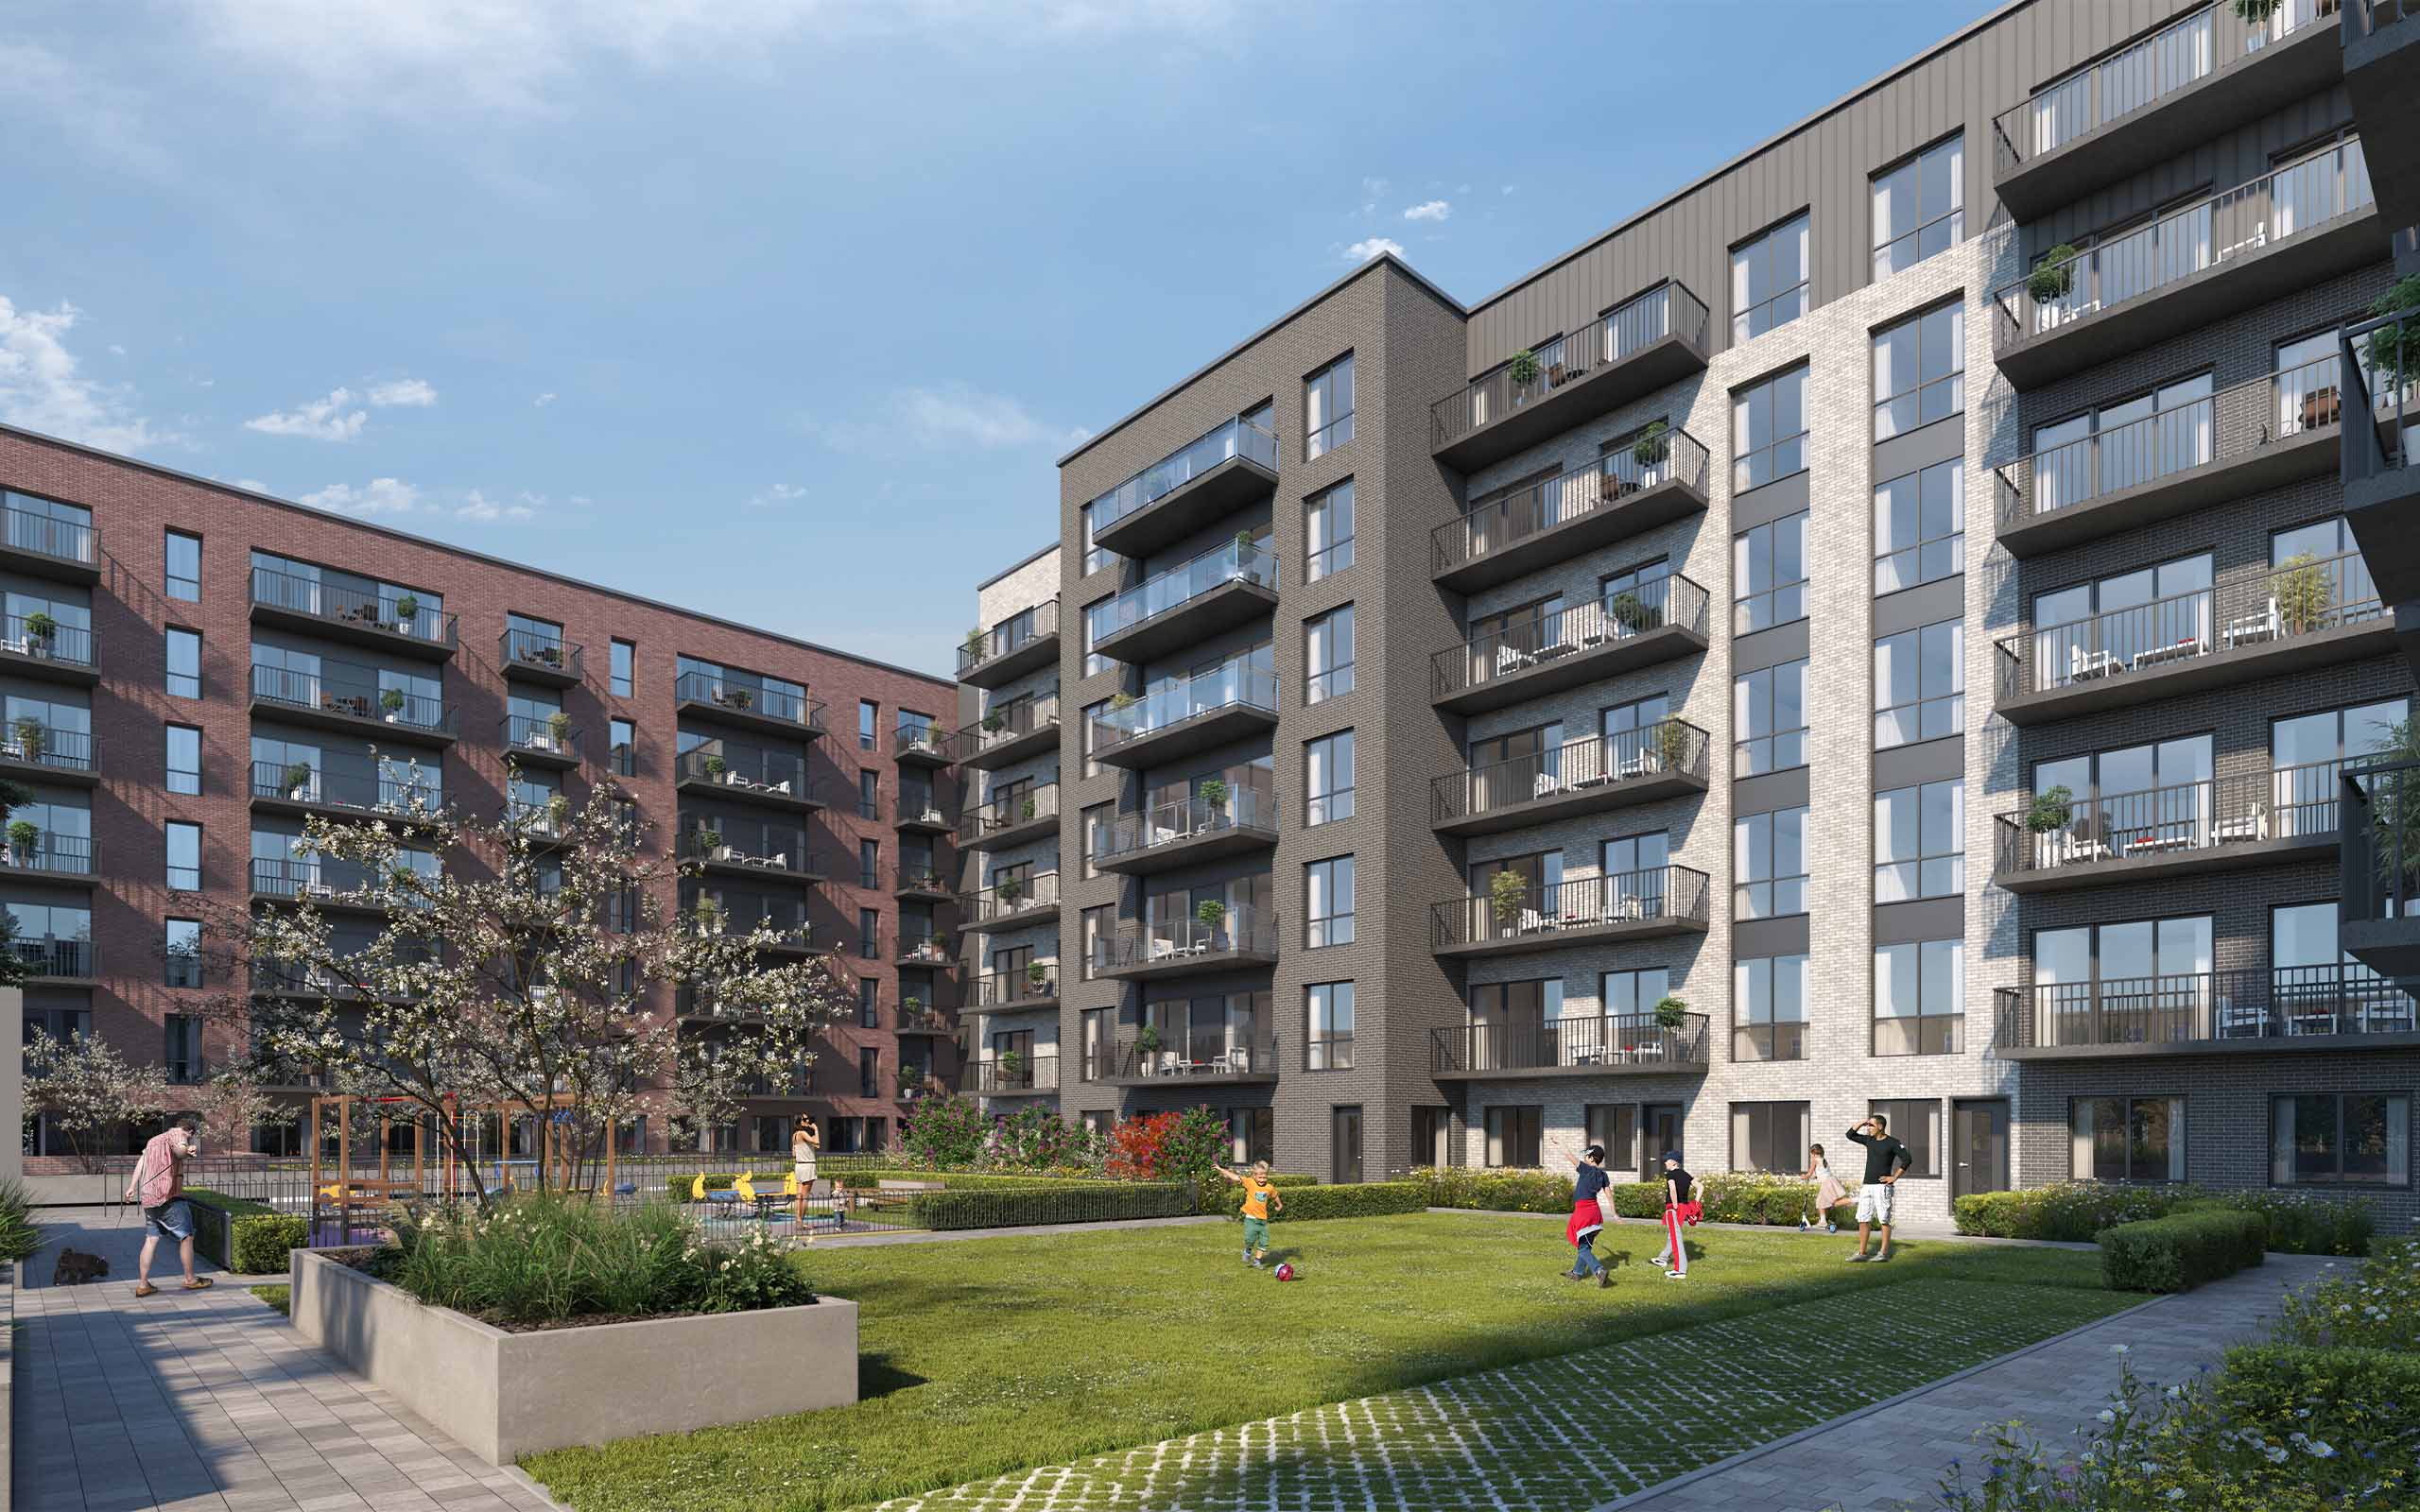 Architectural CGI of BTR Apartments in Glen Abbey, Tallaght.